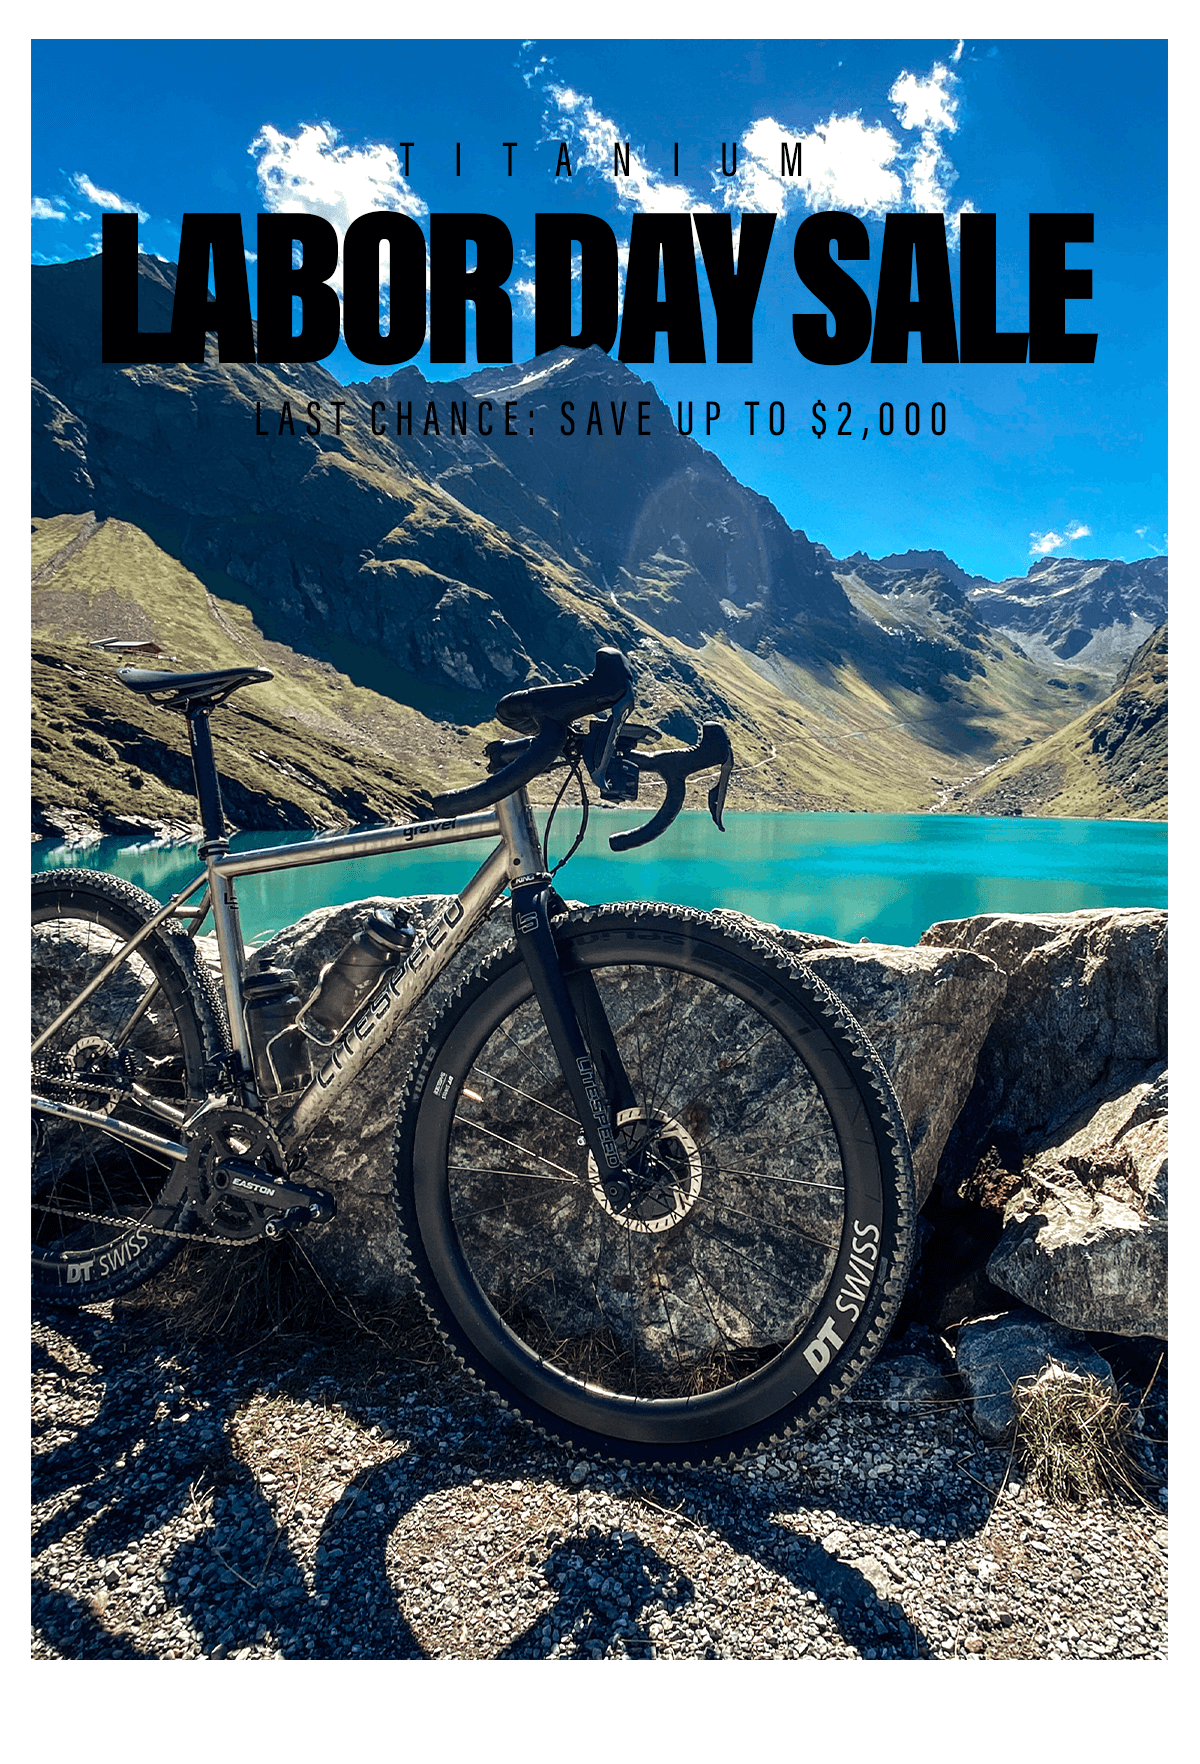 The Litespeed Titanium Labor Day Sale ends Sunday! Save up to $2,000 + free shipping.